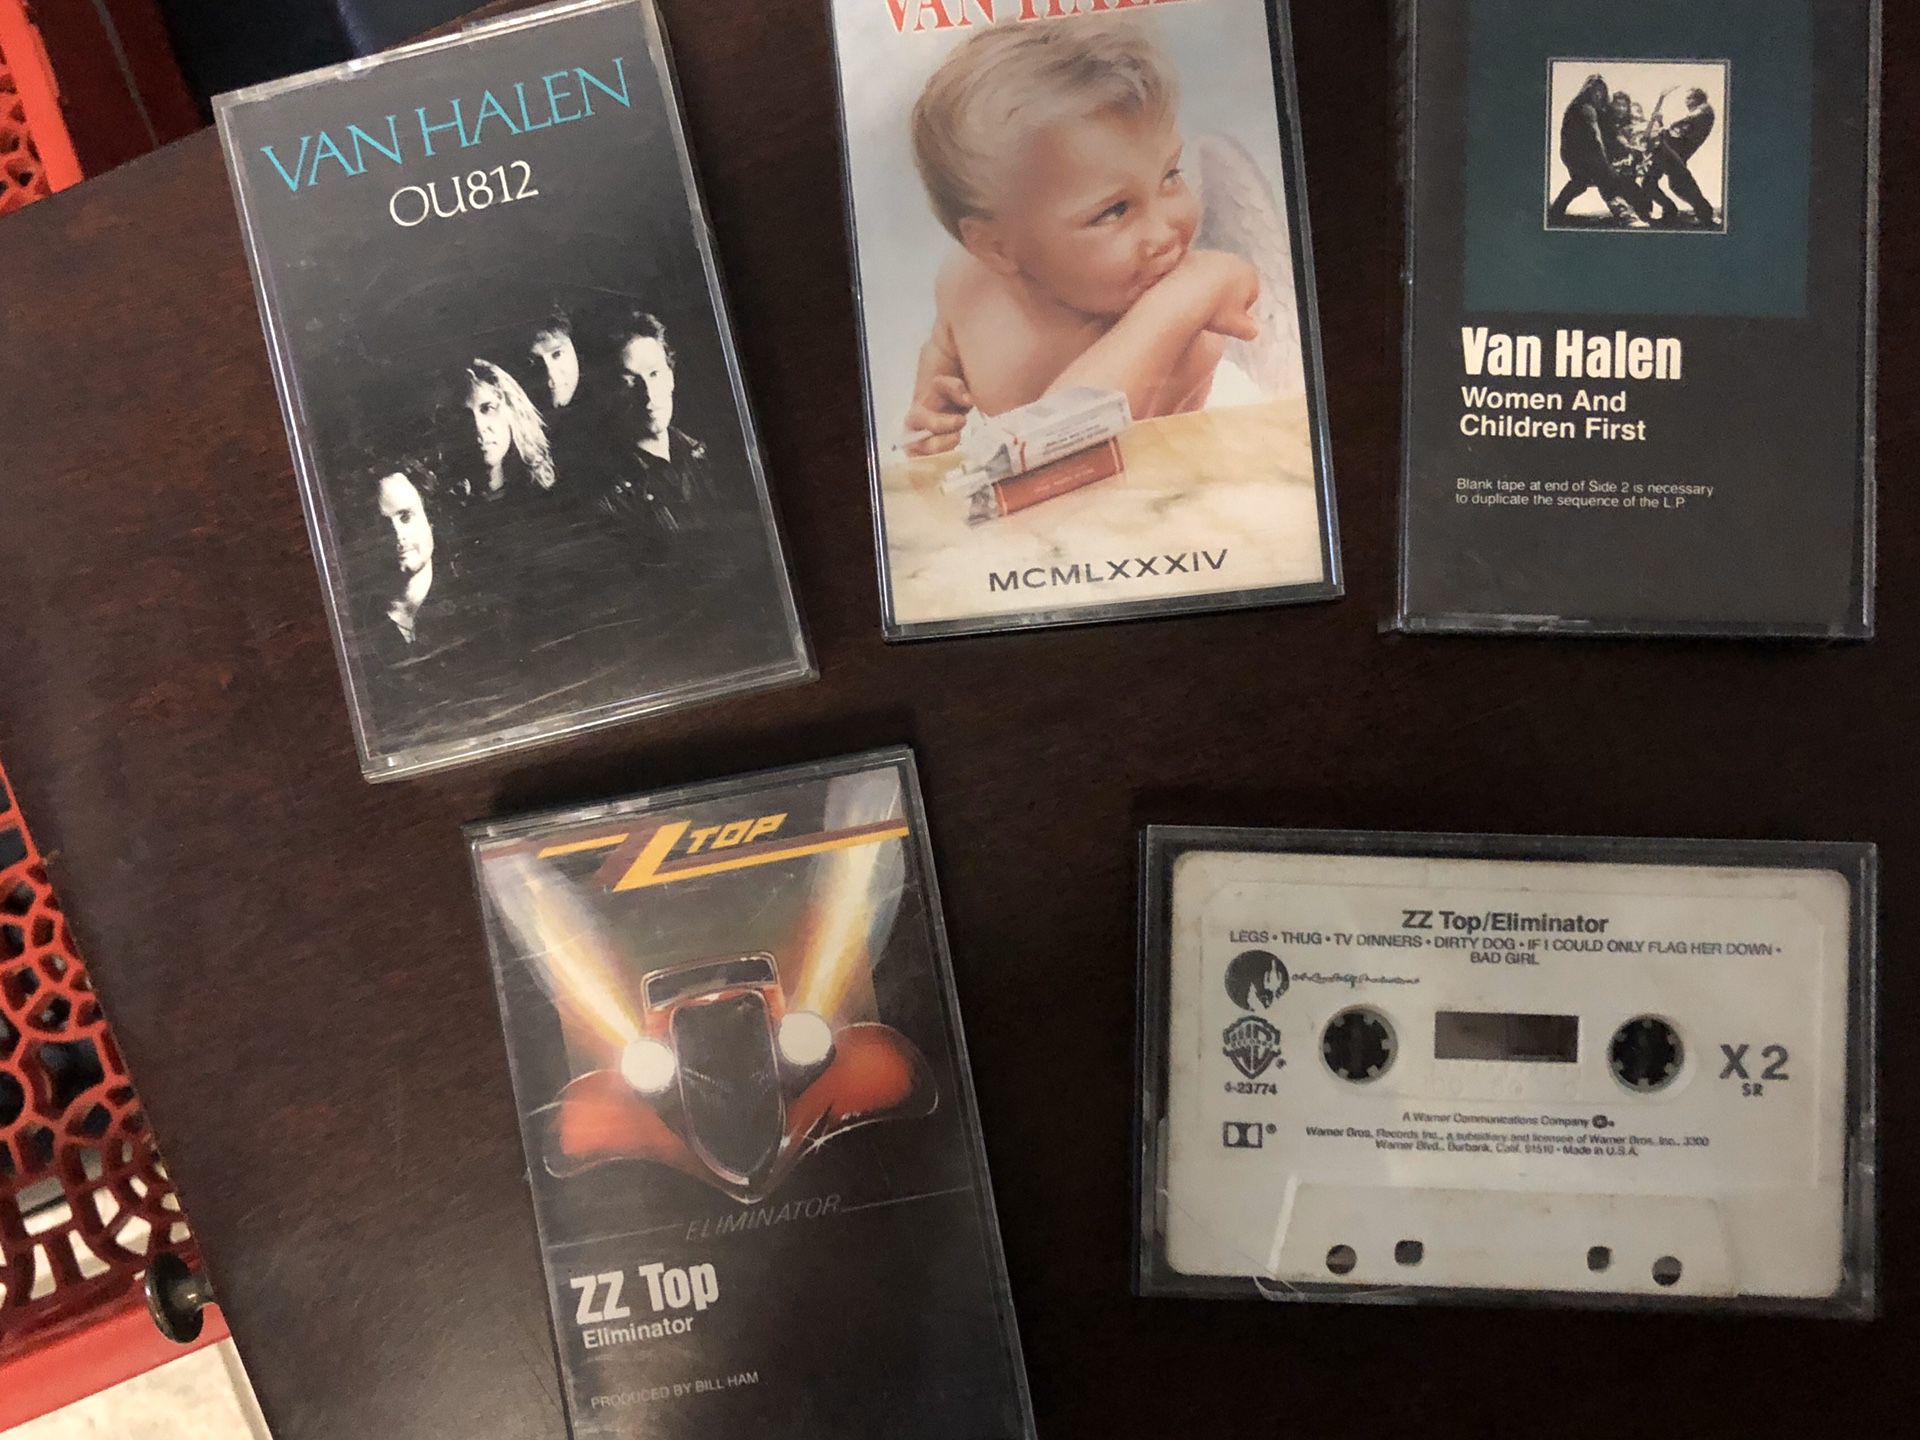 Van Halen and ZZ Top Cassettes - titles are pictured